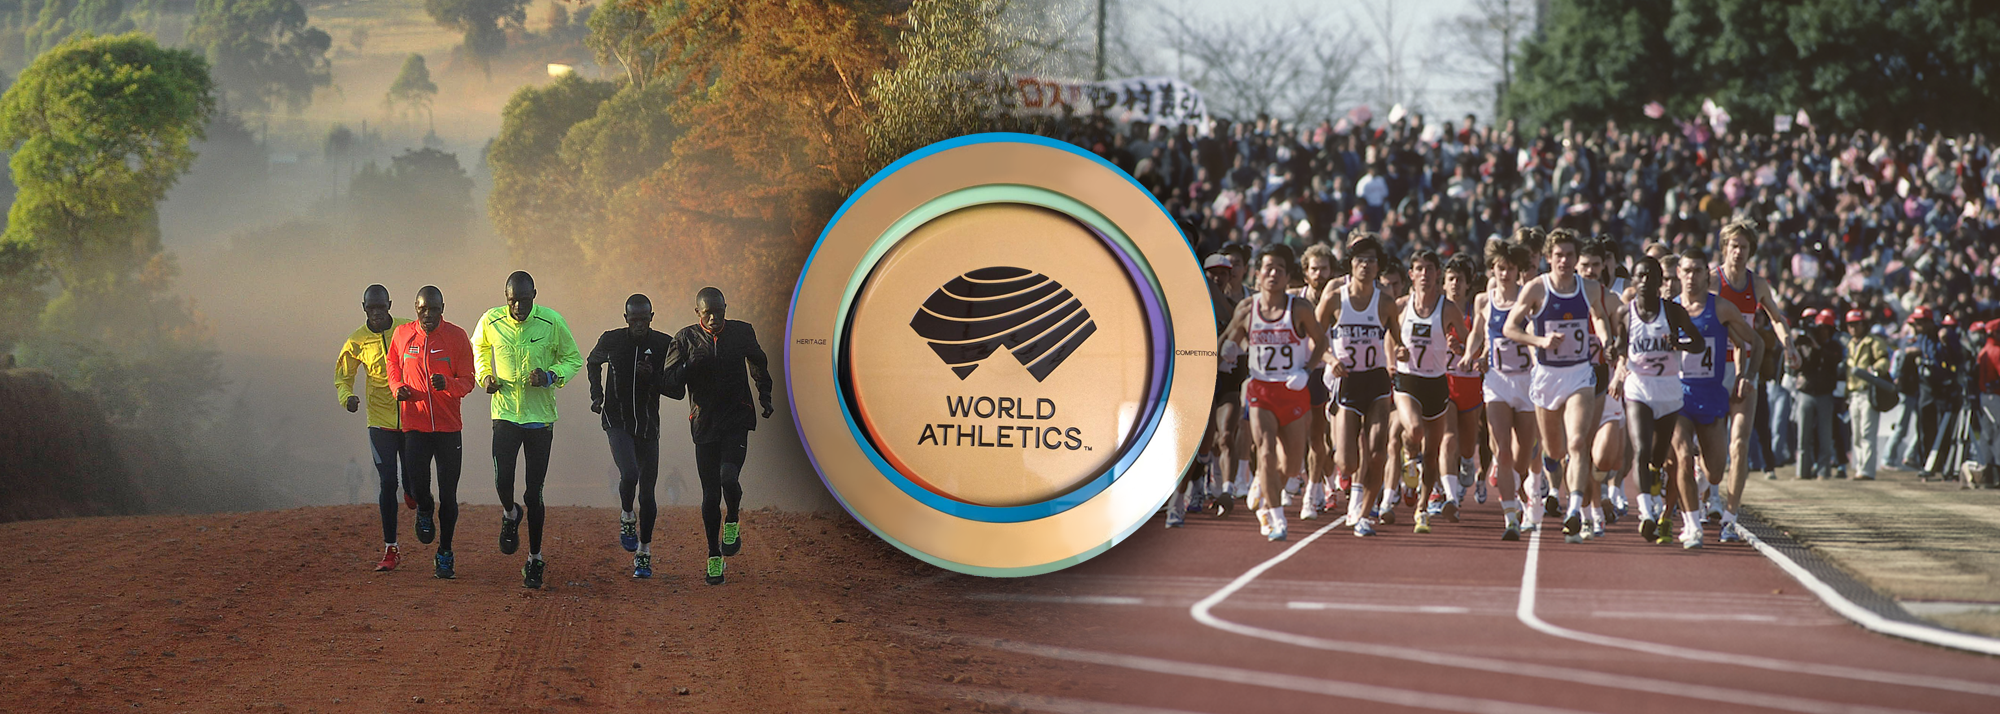 The Kenyan town of Iten and the Japanese city of Fukuoka – two iconic athletics locations – have been awarded the World Athletics Heritage Plaque.